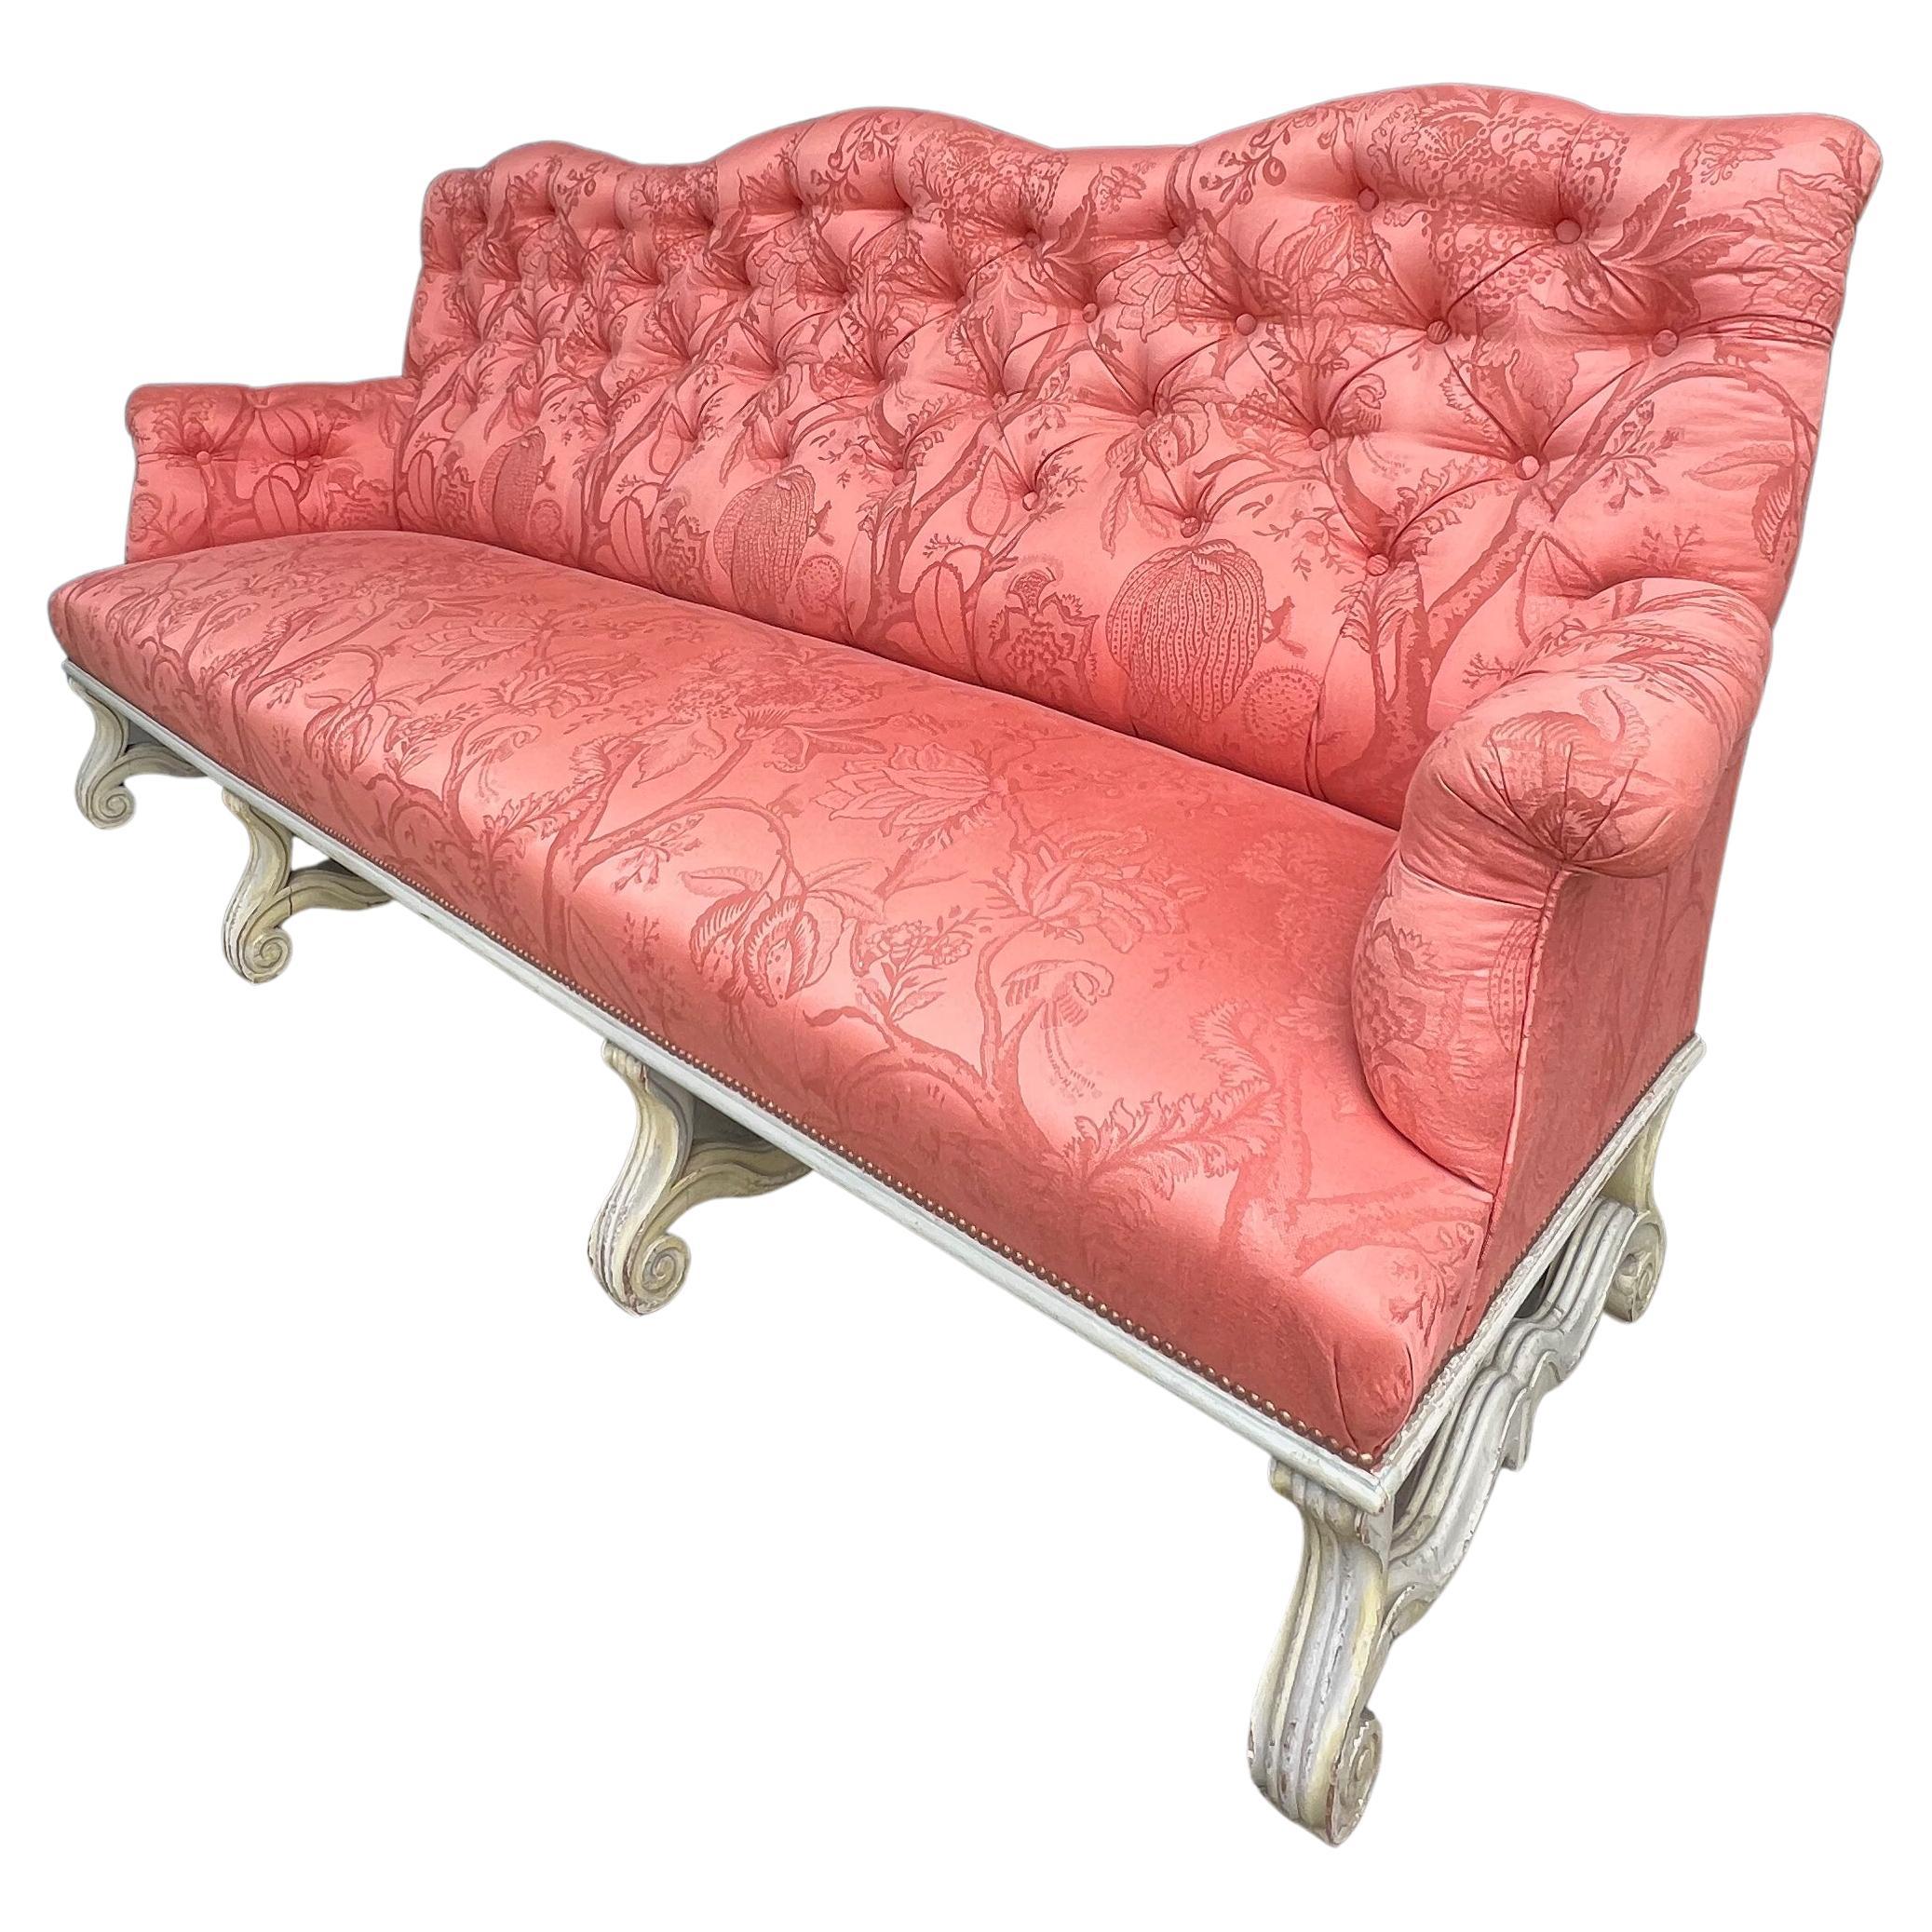 Large French Neo-Baroque Style Sofa For Sale